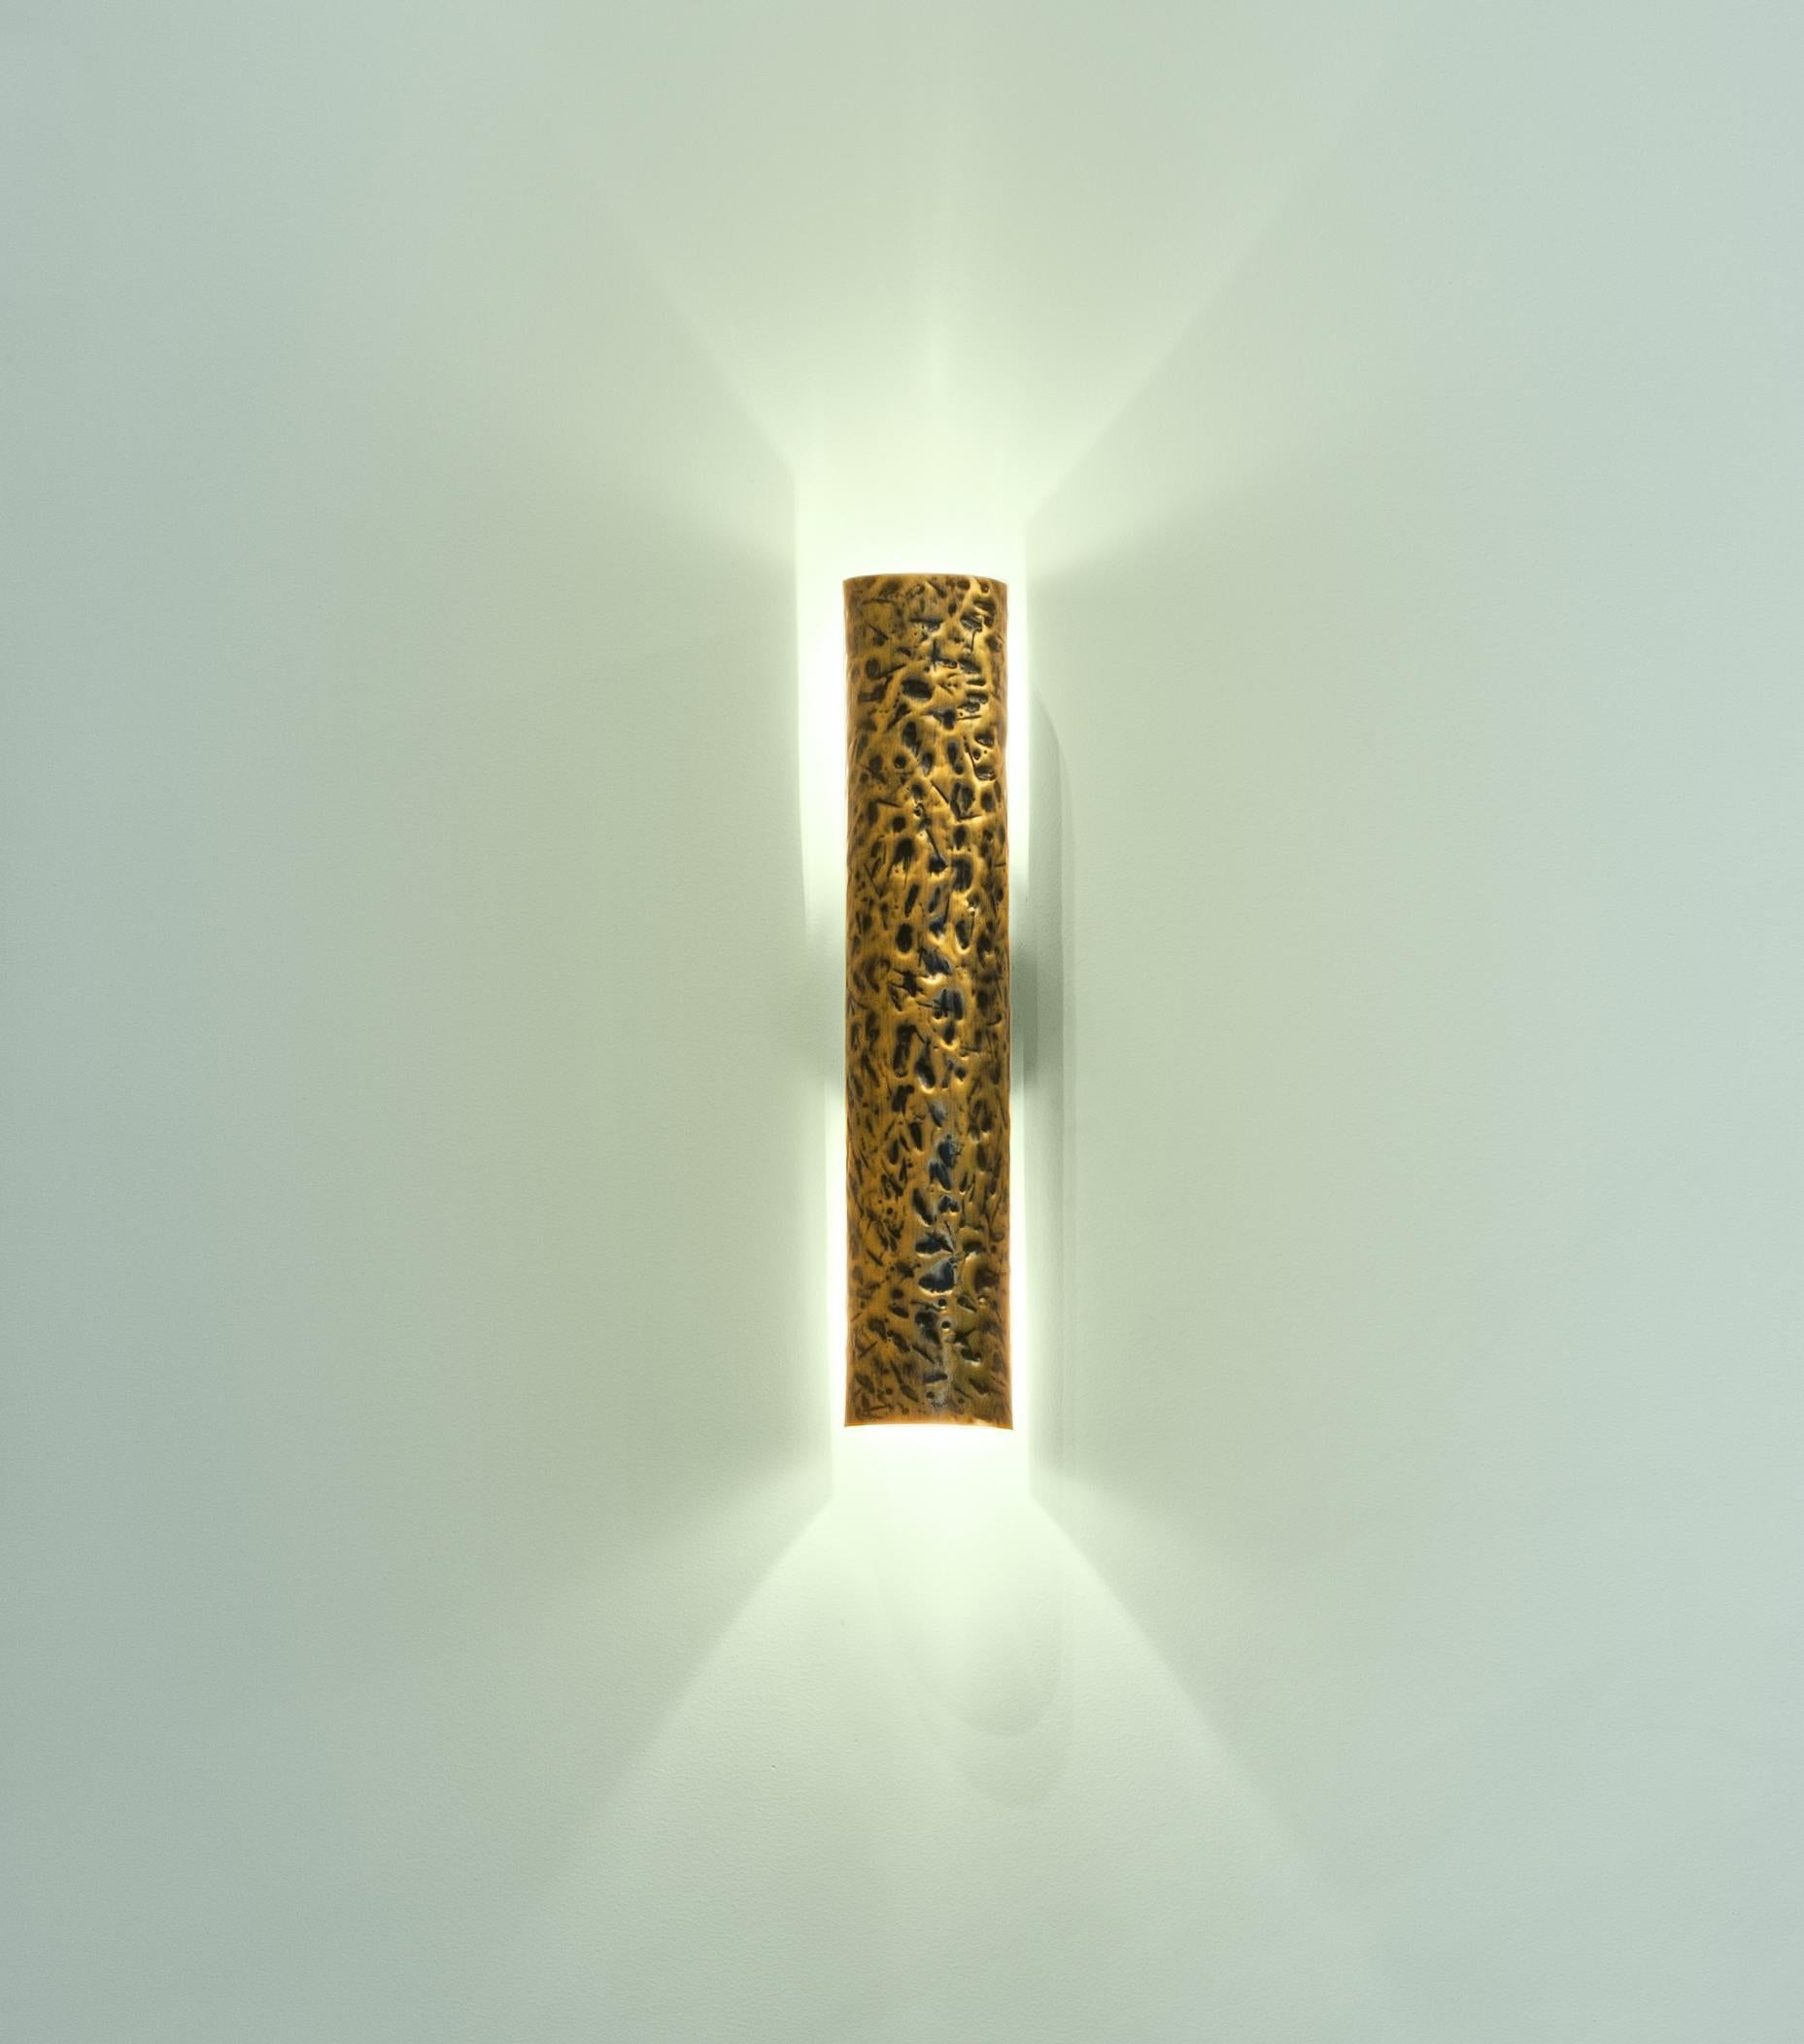 Modern Tree Branches Wall Lamp, Hammered Steel, InsidherLand by Joana Santos Barbosa For Sale